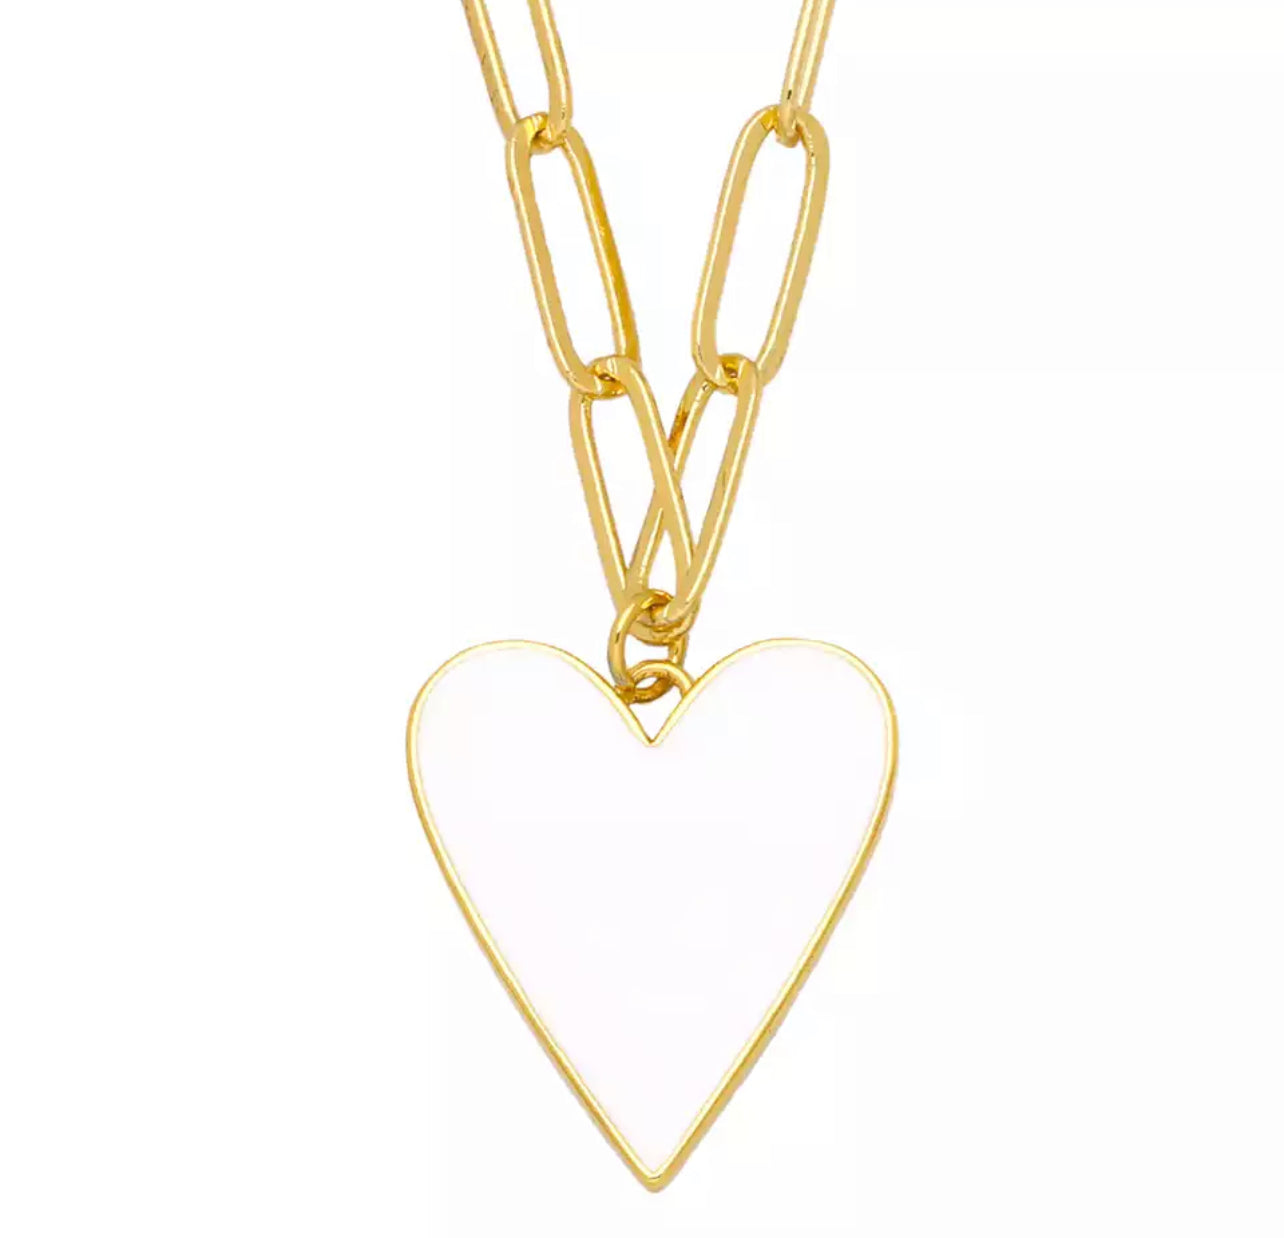 Necklace gold plated with white heart pendant